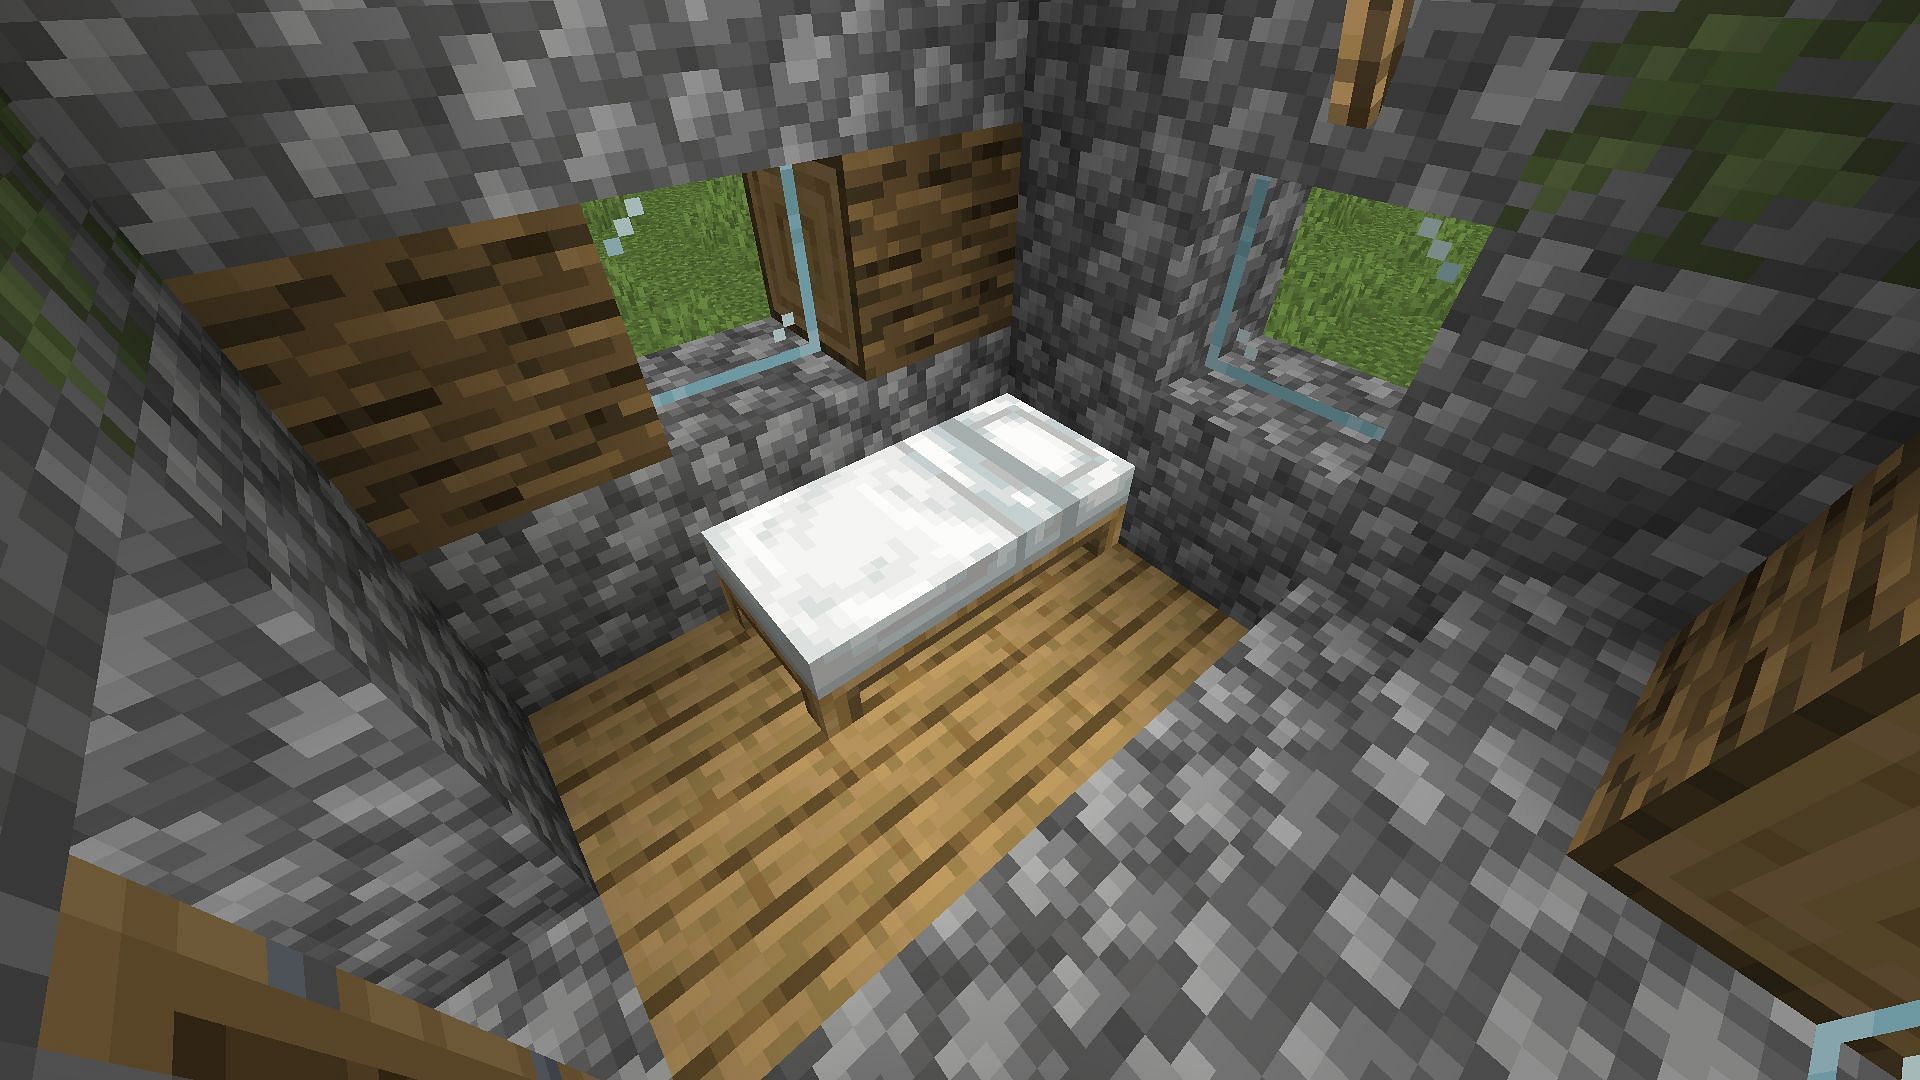 A total of three unclaimed beds should be present near villagers in Minecraft (Image via Mojang)